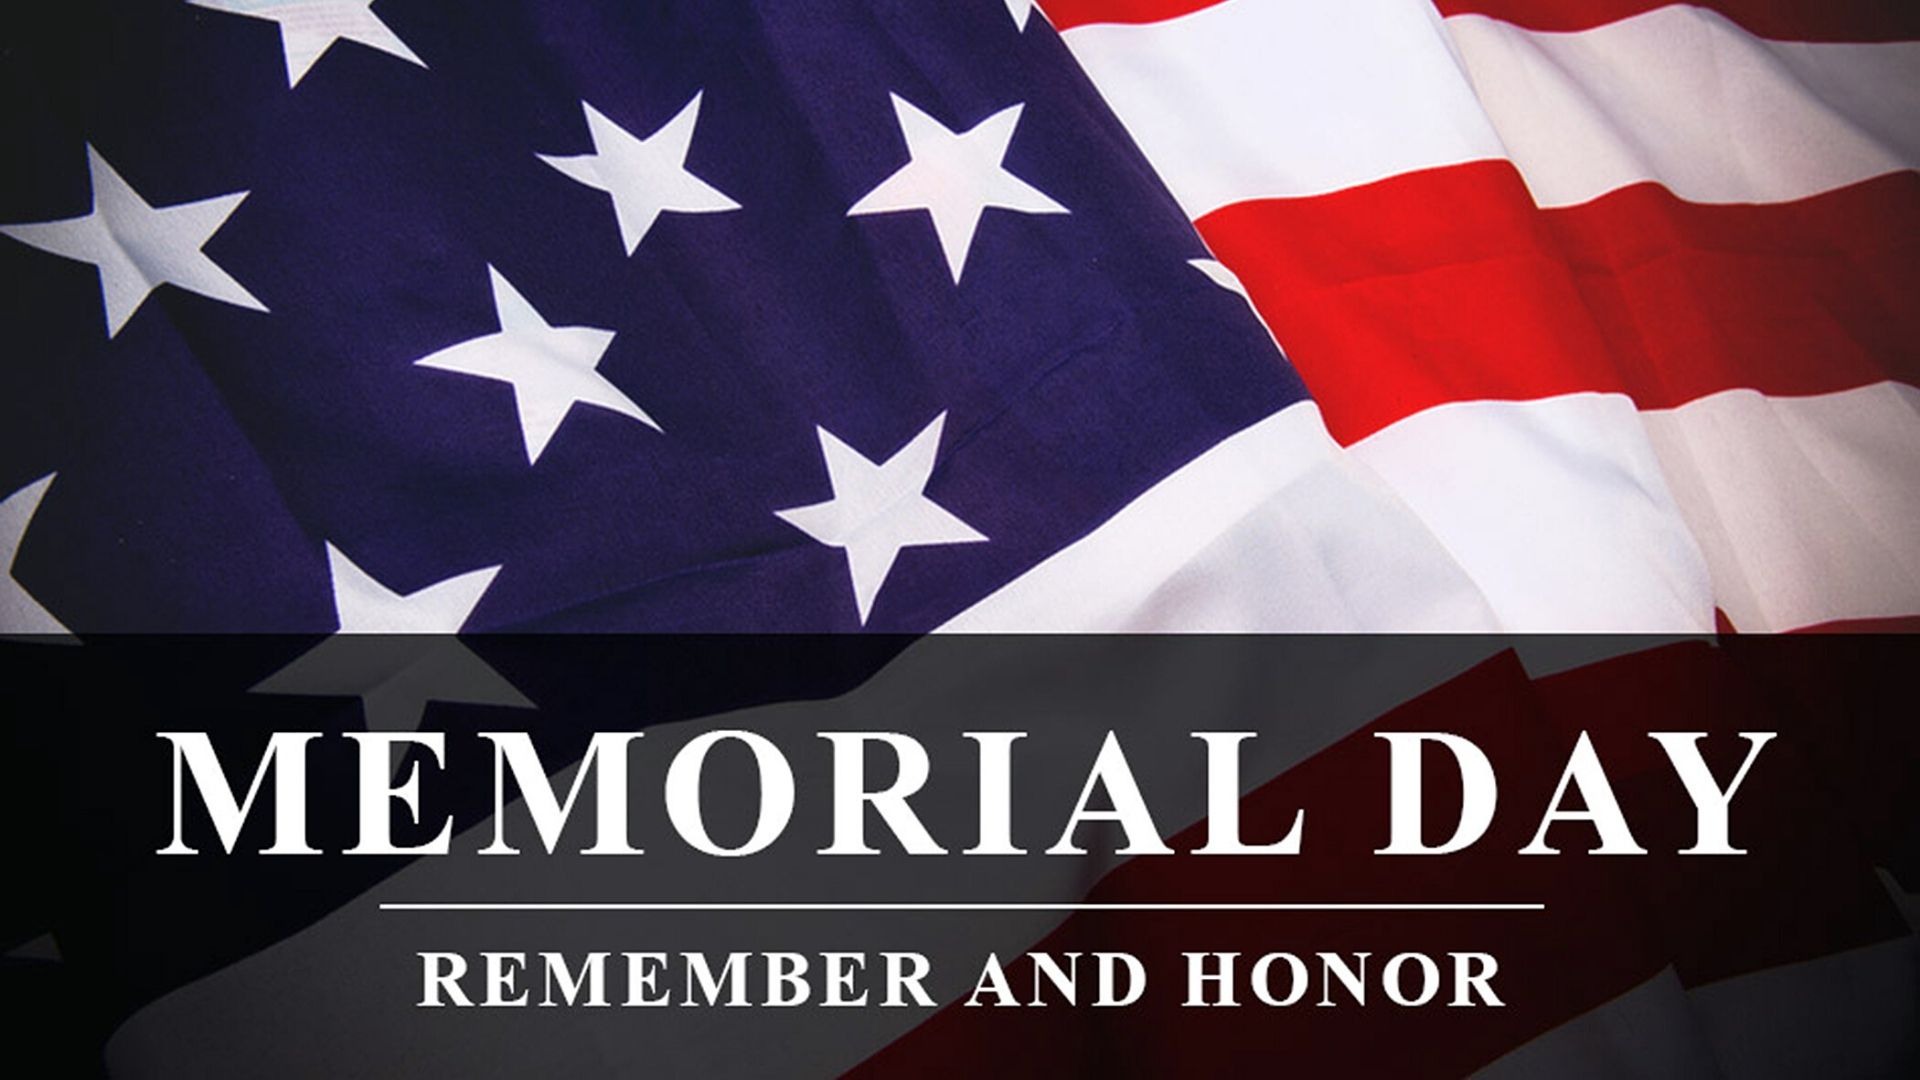 Wishing you a blessed Memorial Day